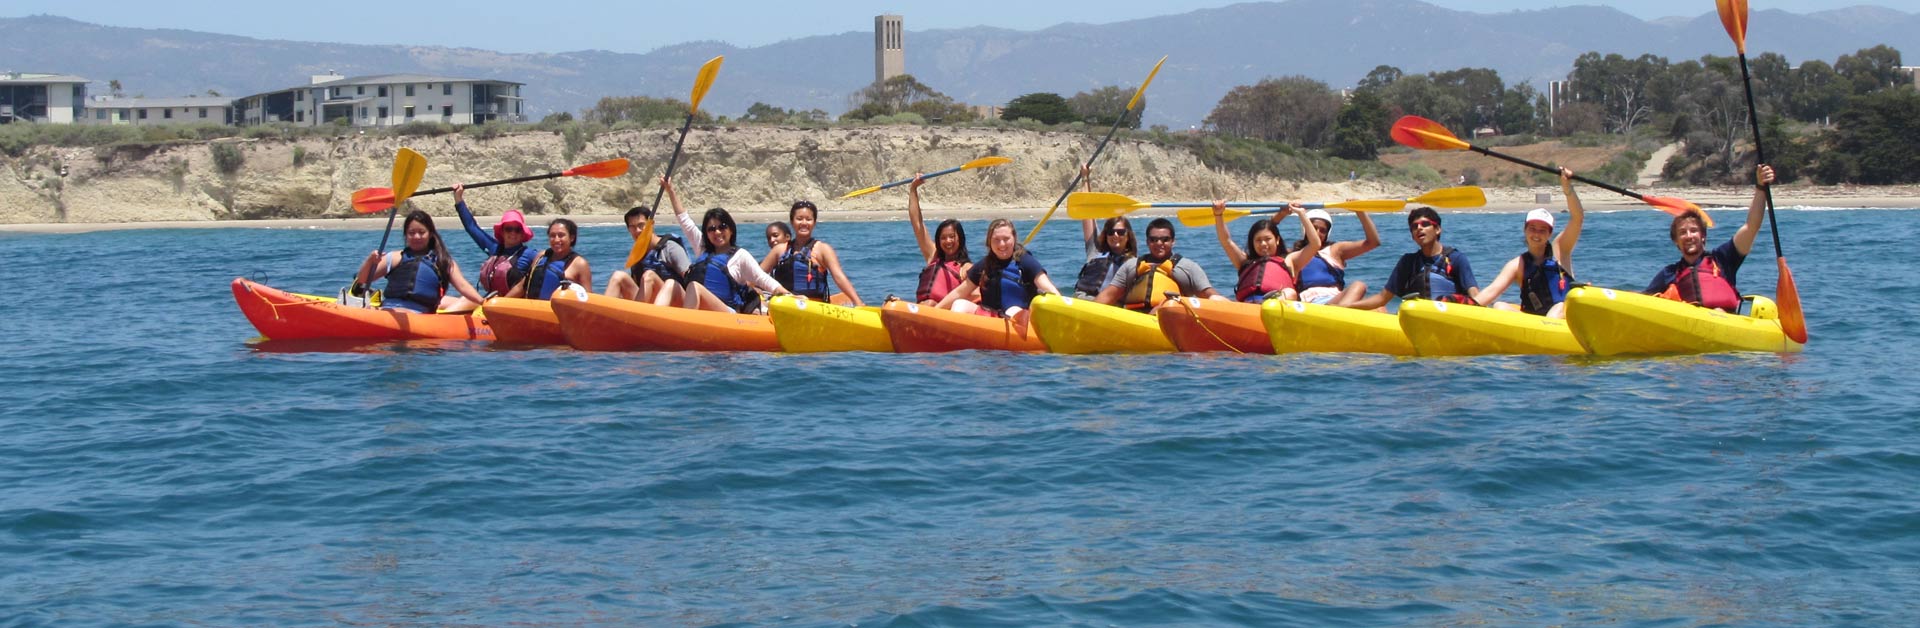 Group of kayakers on the ocean during a Santa Barbara Channelkeeper community engagement event.